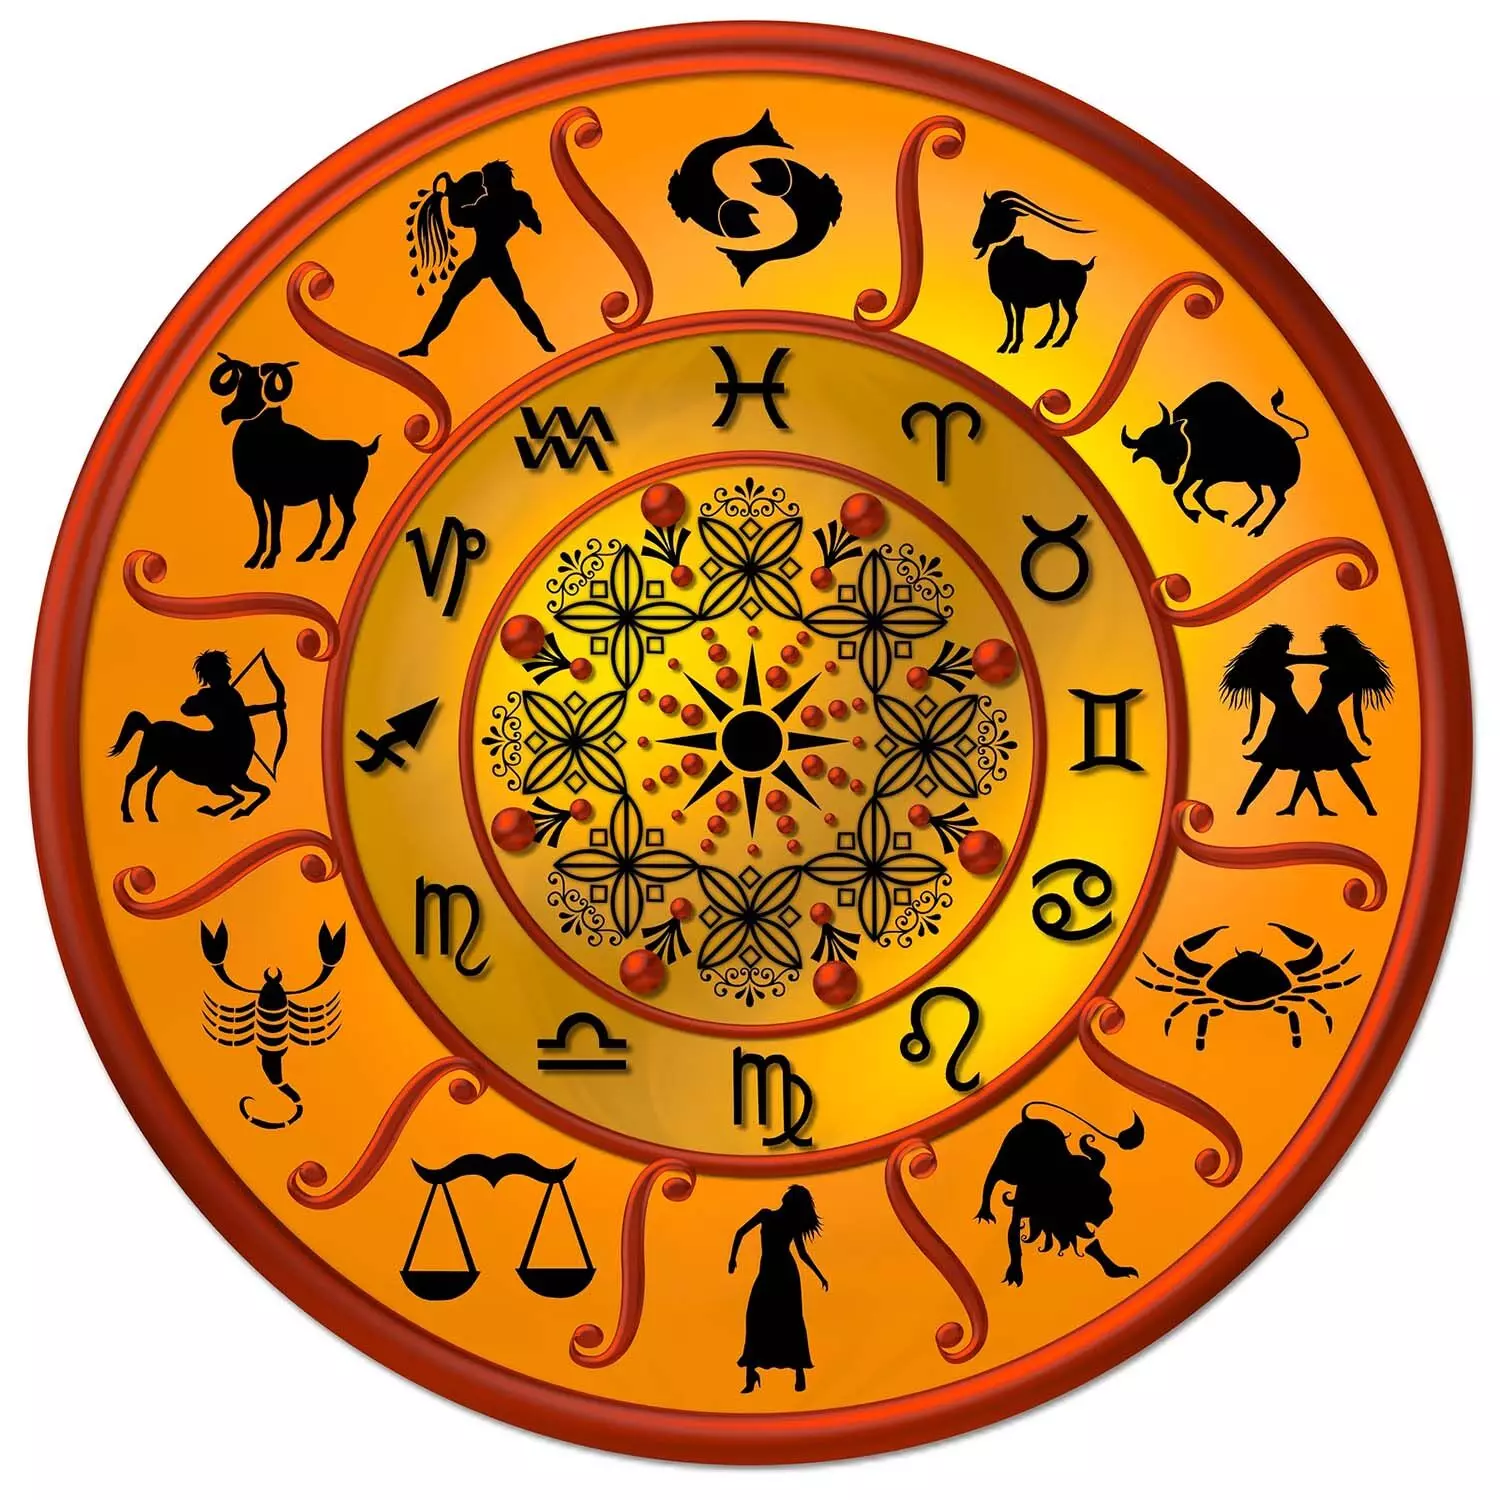 17 June – Know your todays horoscope